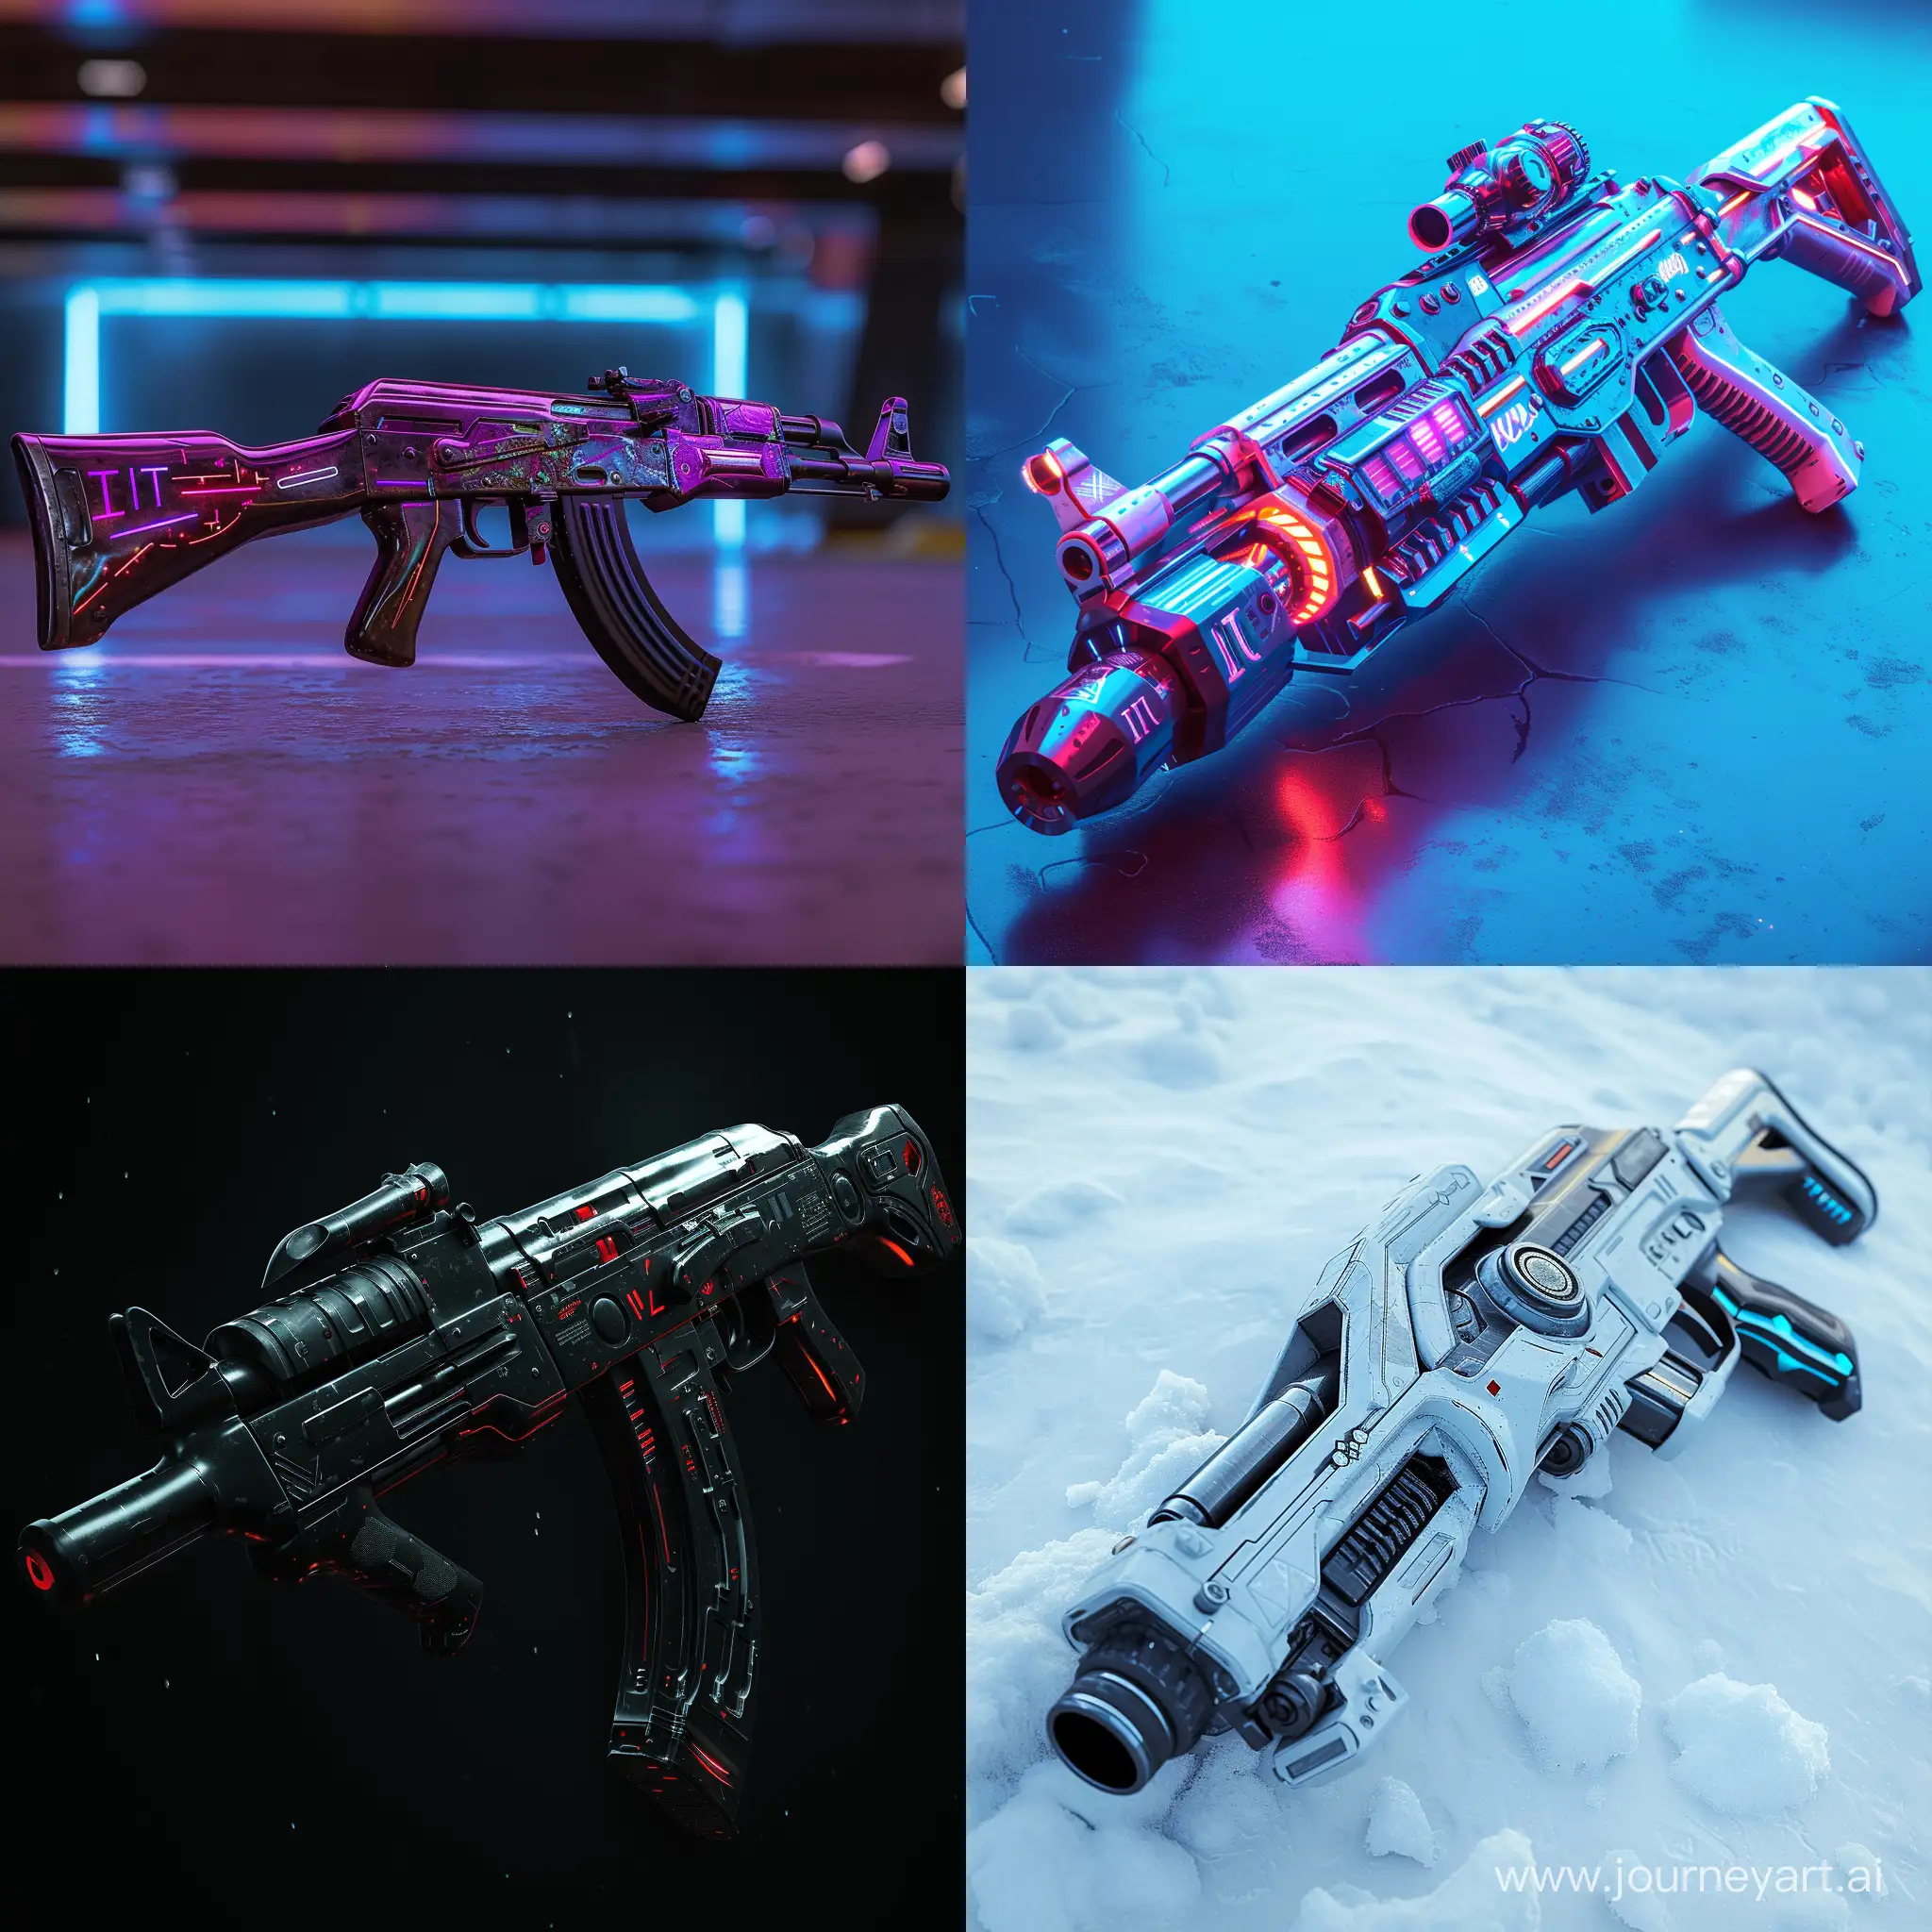 Futuristic AK-47, in IT style, in cinematic style